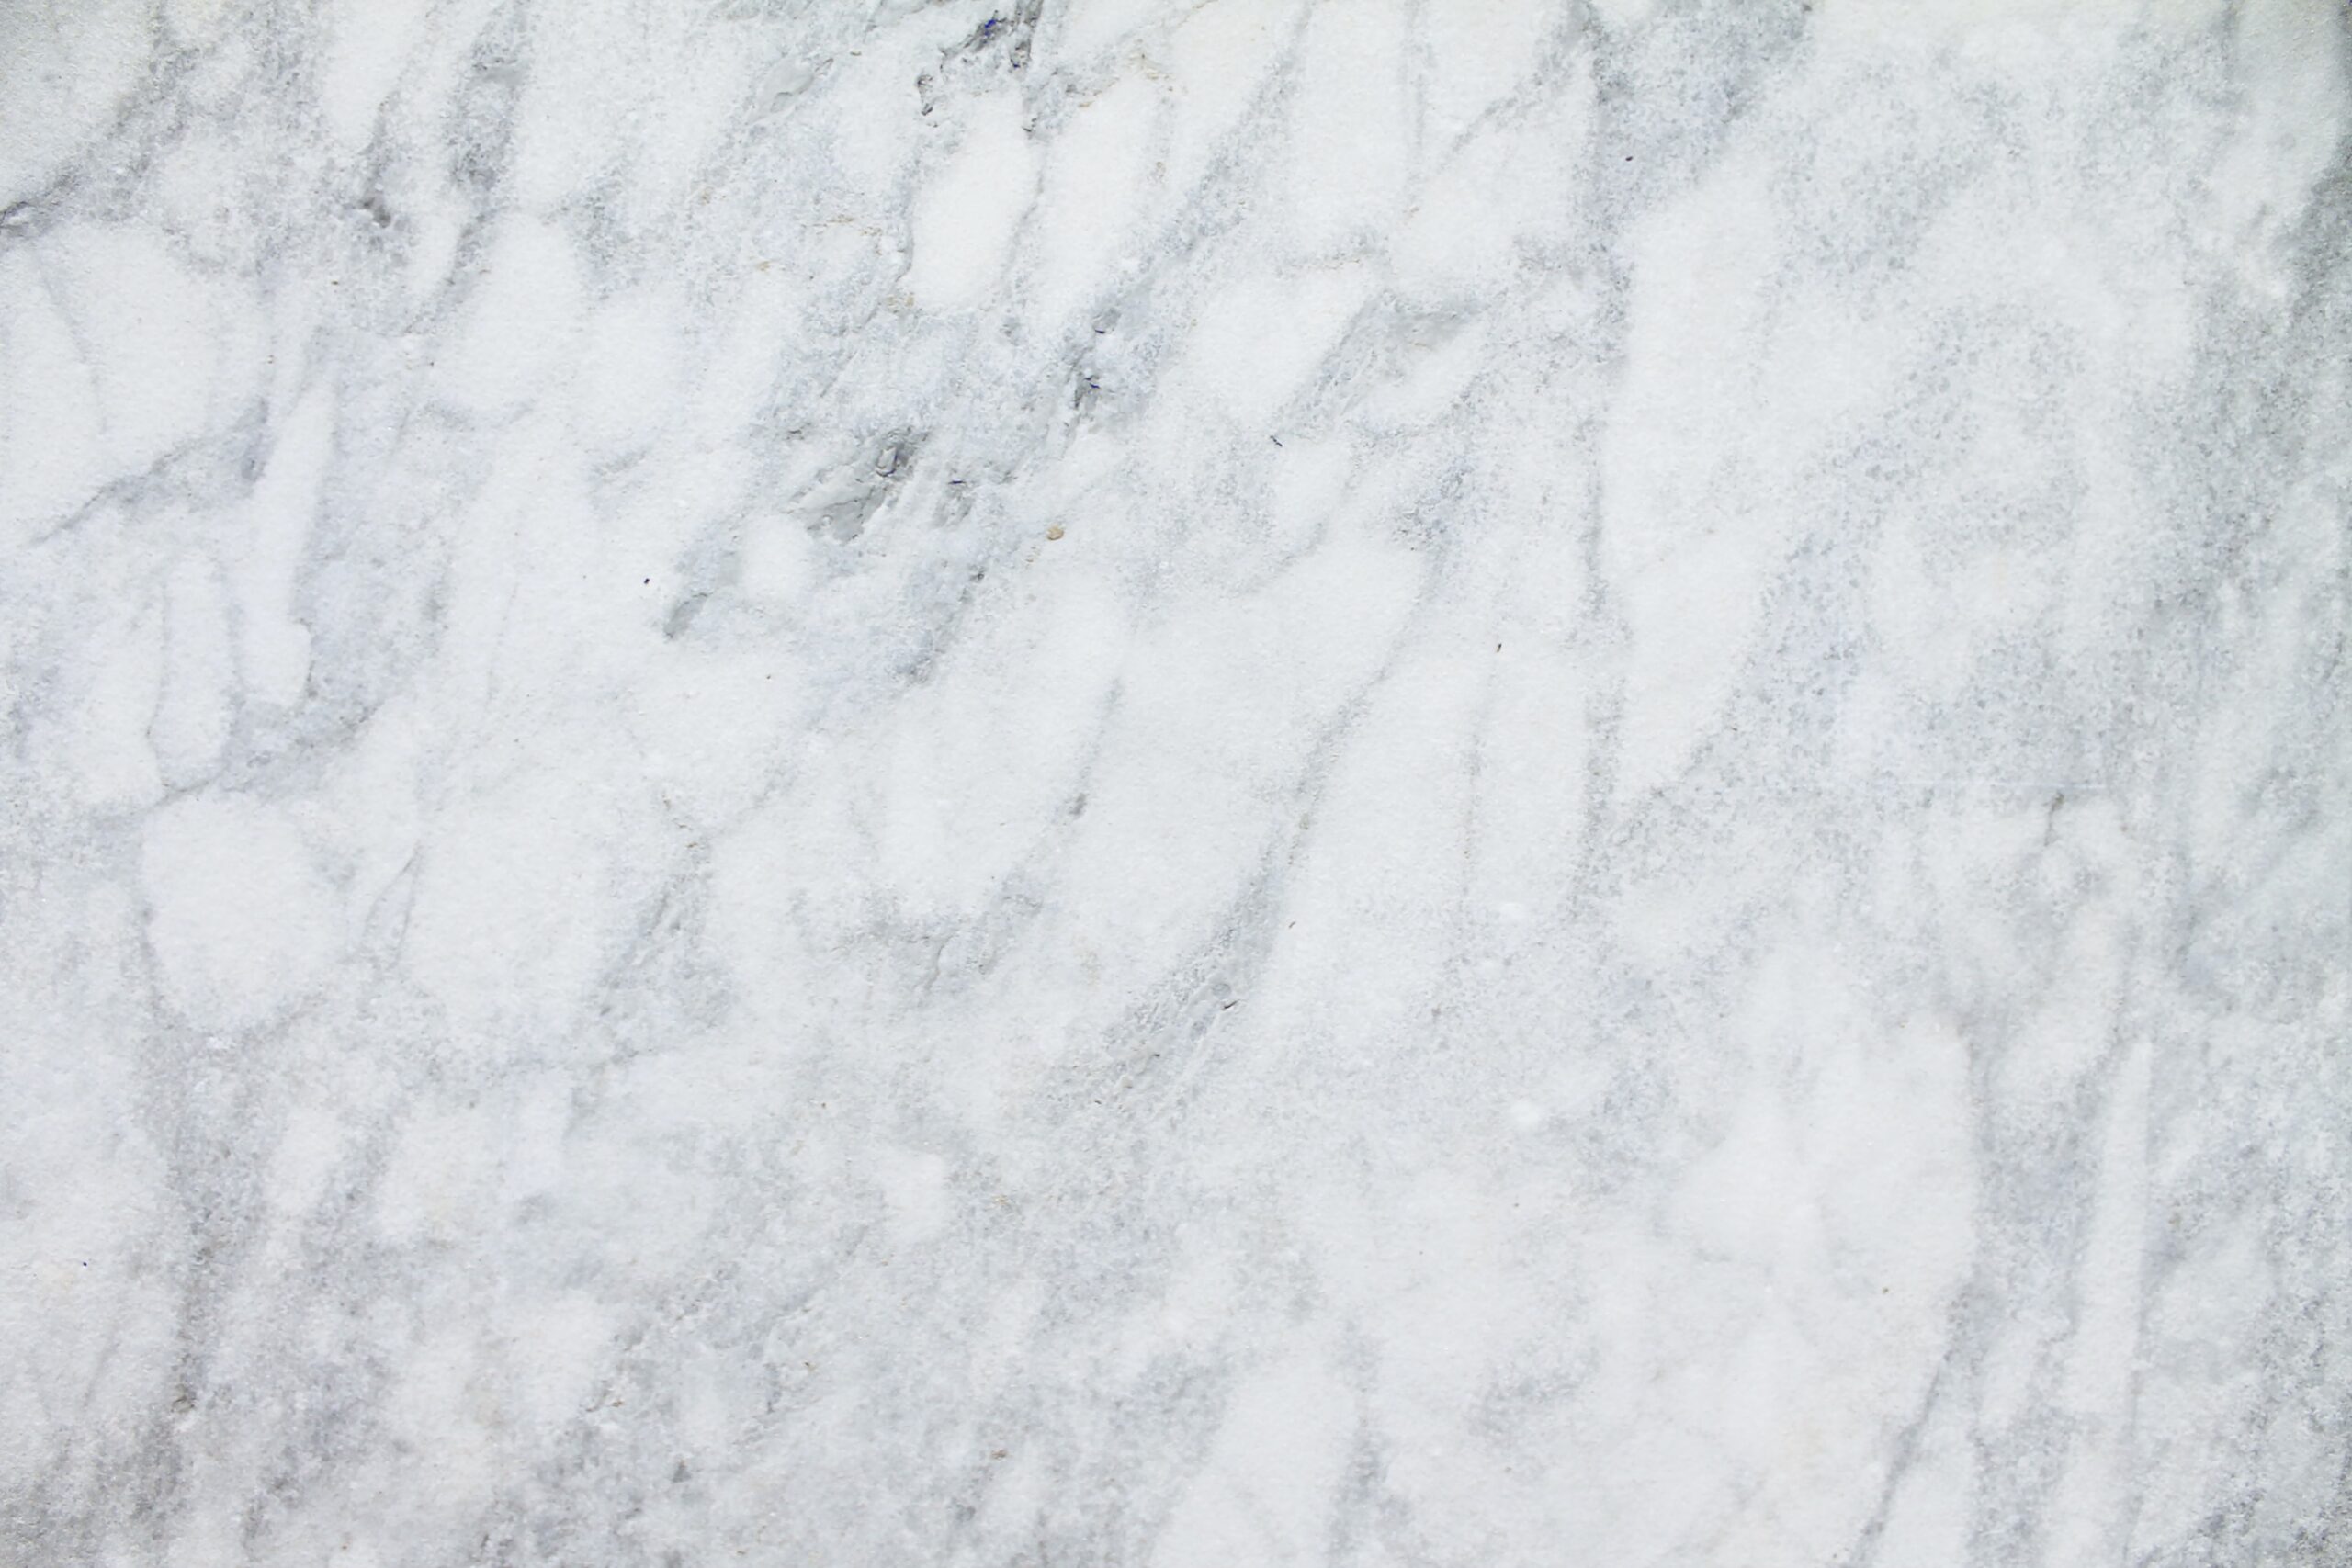 Image of grey and white veined quartz countertop